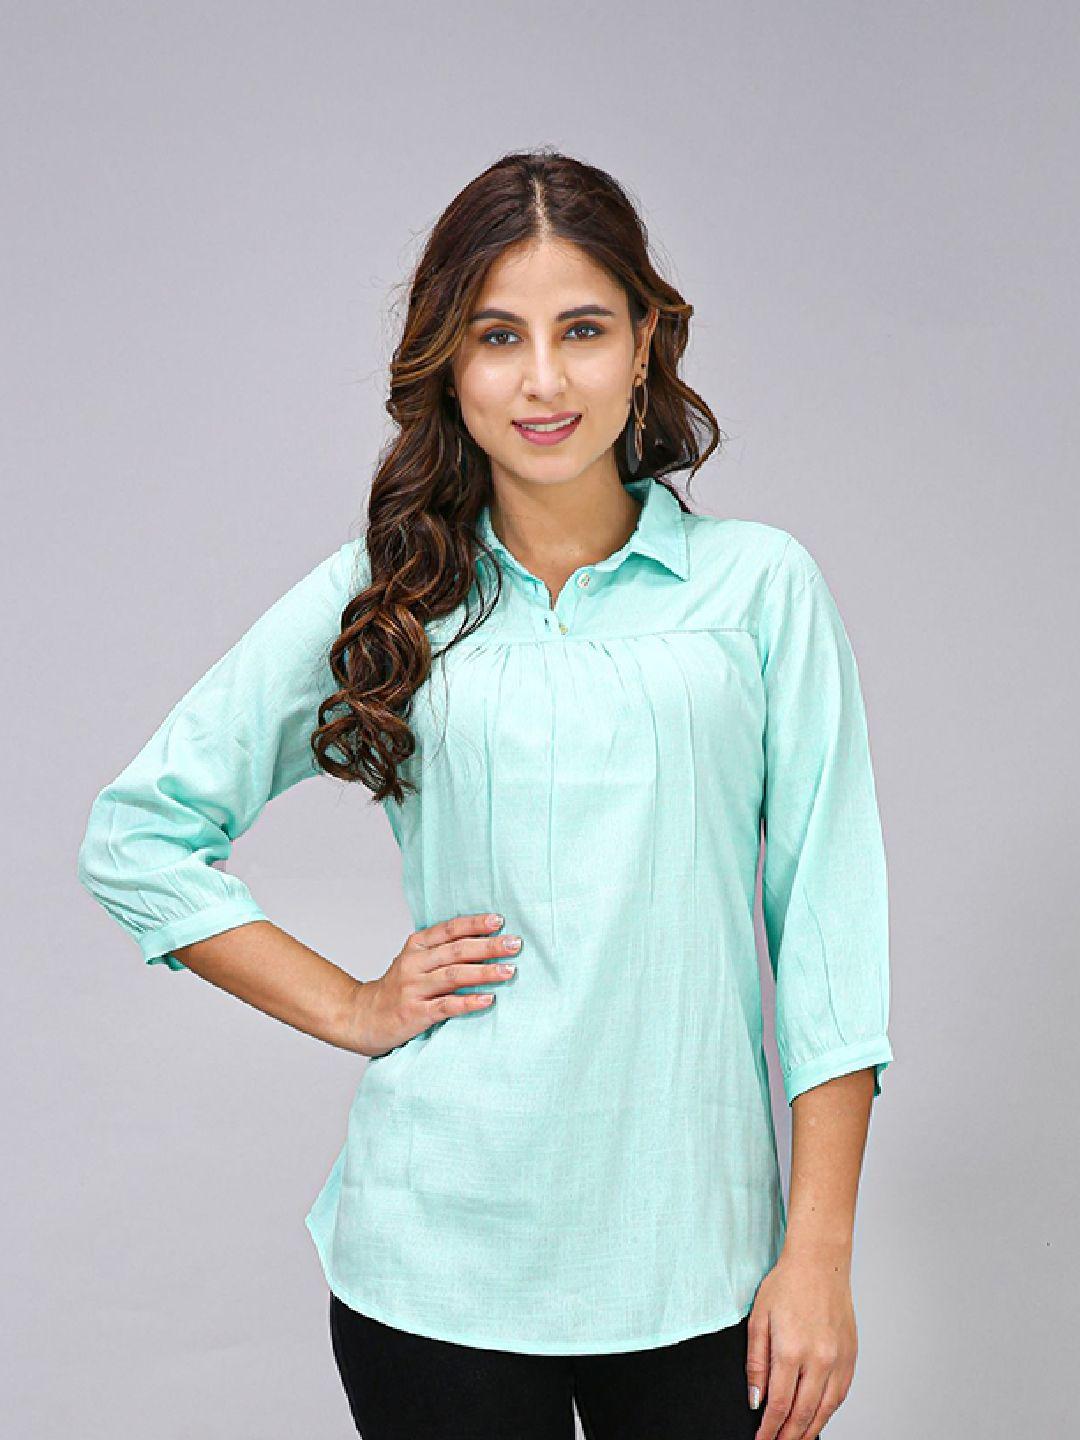 maiyee blue cotton shirt style top